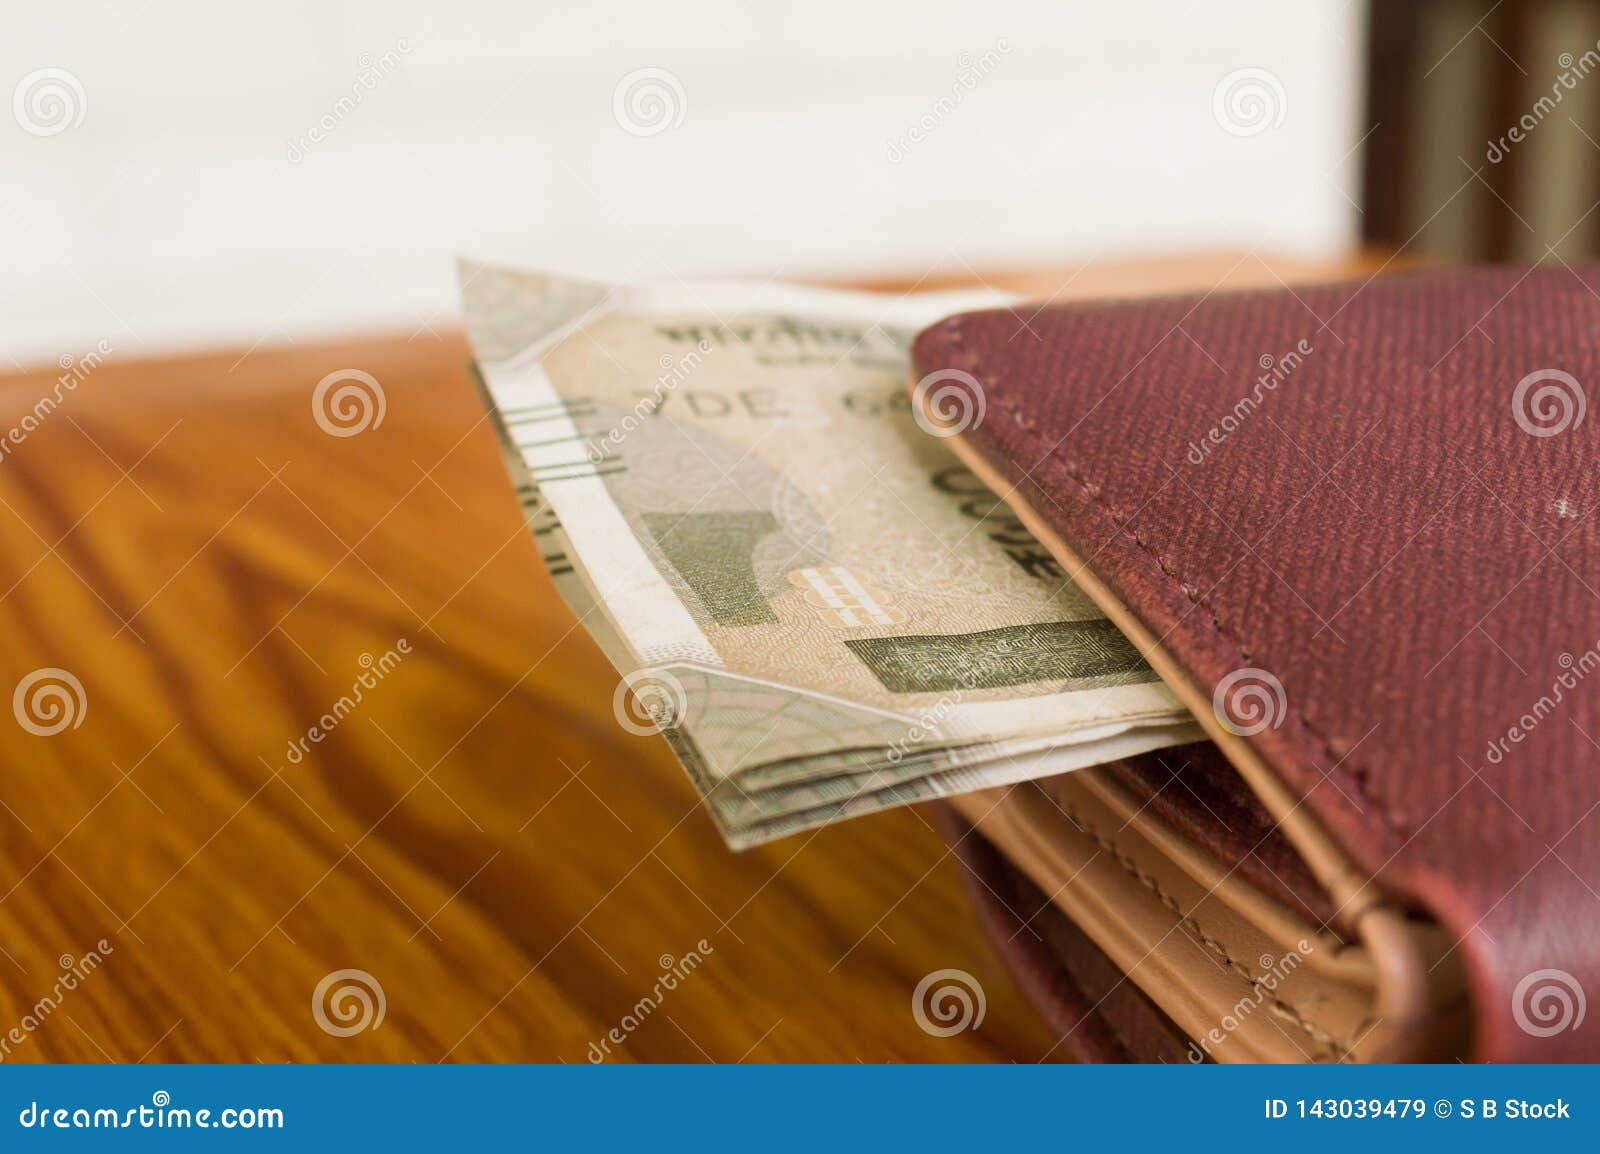 Premium Photo | Woman's hands holding leather wallet with brand new indian  100, 200, 500, 2000 rupees banknotes. | Money images, Money vision board,  Money and happiness